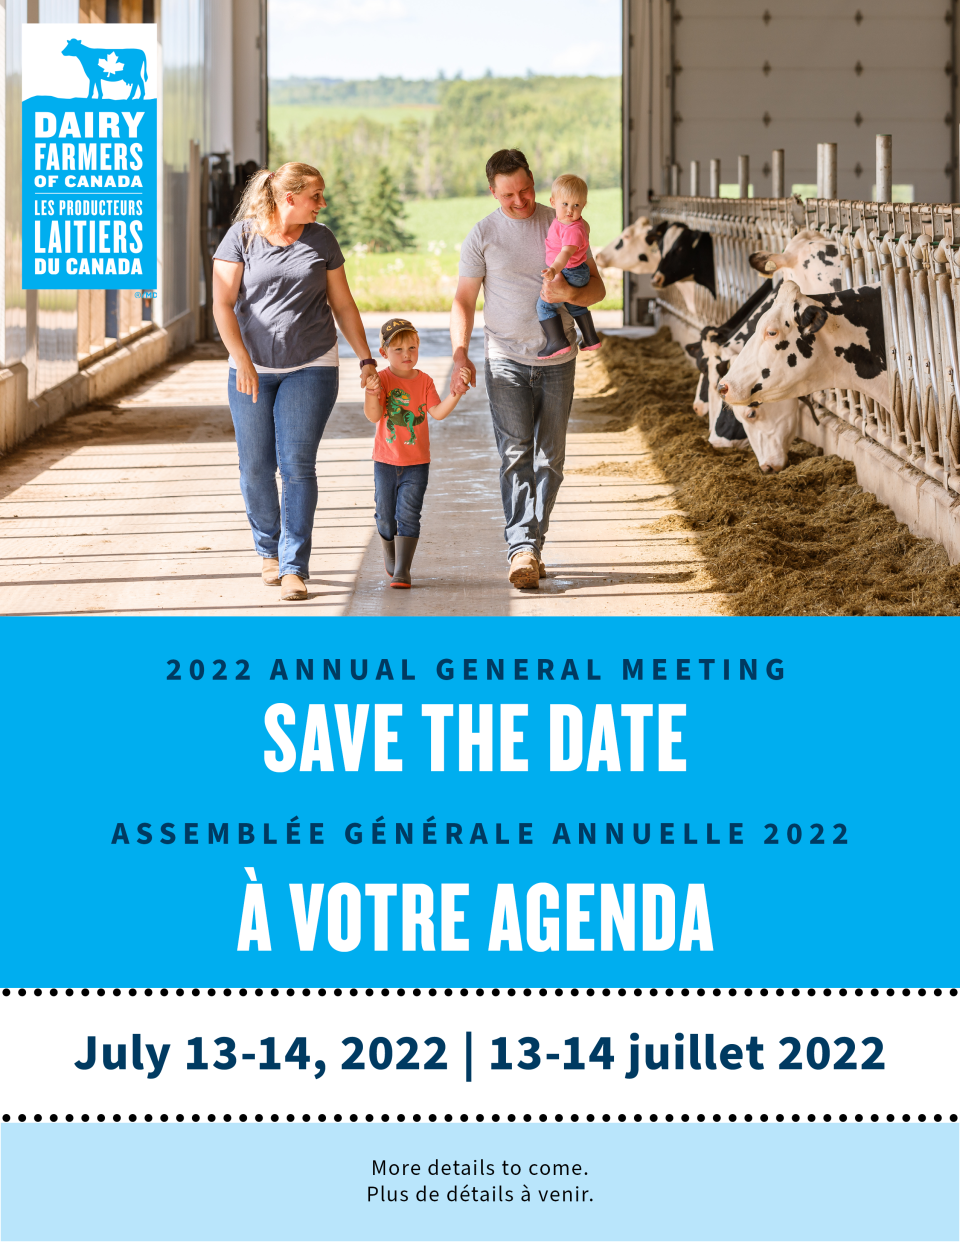 Dairy Farmers of Canada AGM save the date. July 13 to 14, 2022